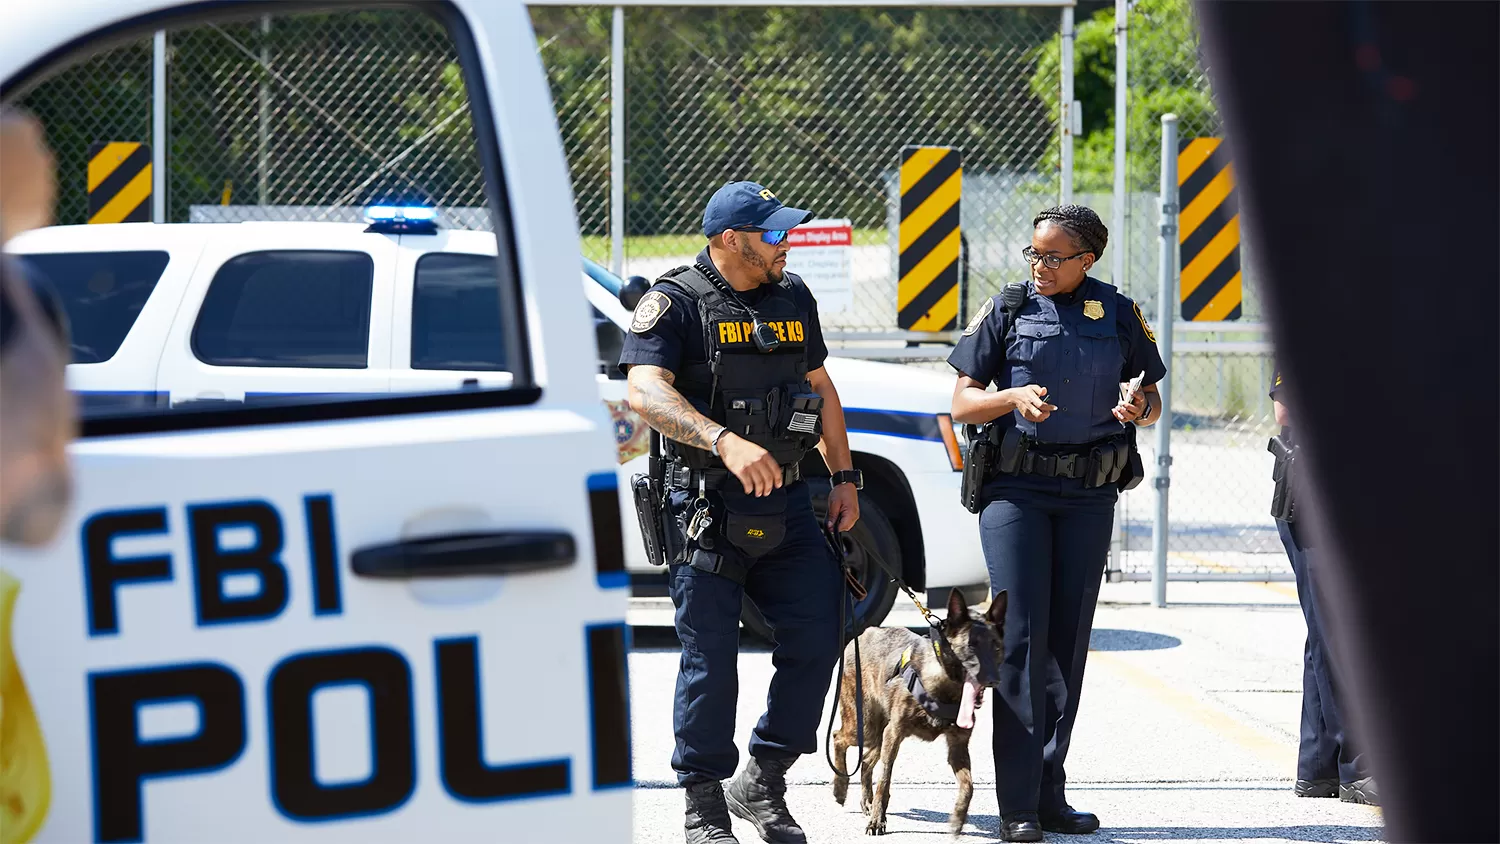 Two FBI police officers and their dog talking in front of their police vehicle